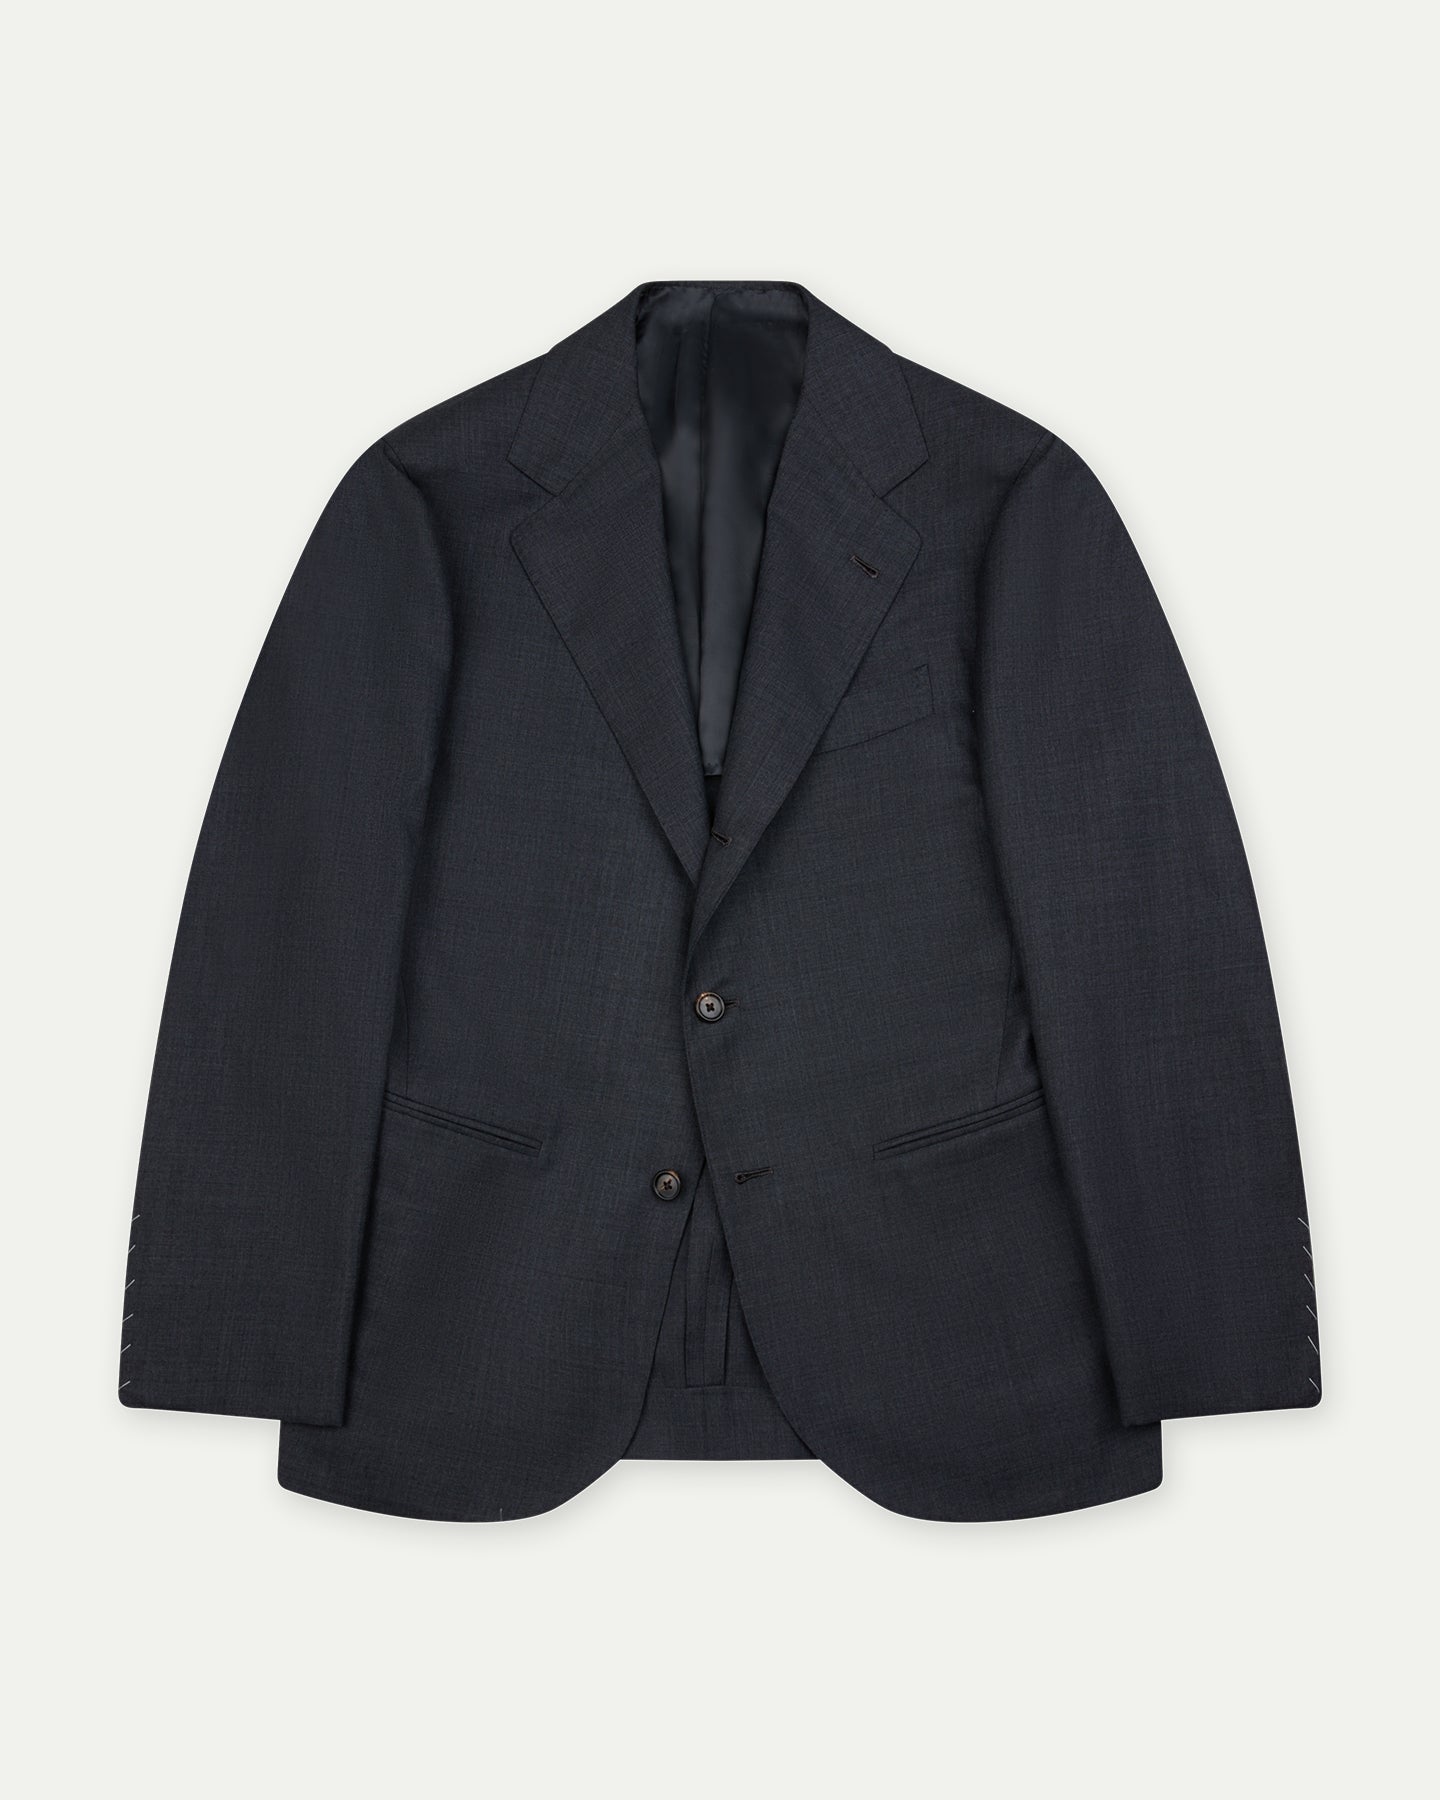 Made-To-Order Mid Grey Sharkskin Suit Jacket